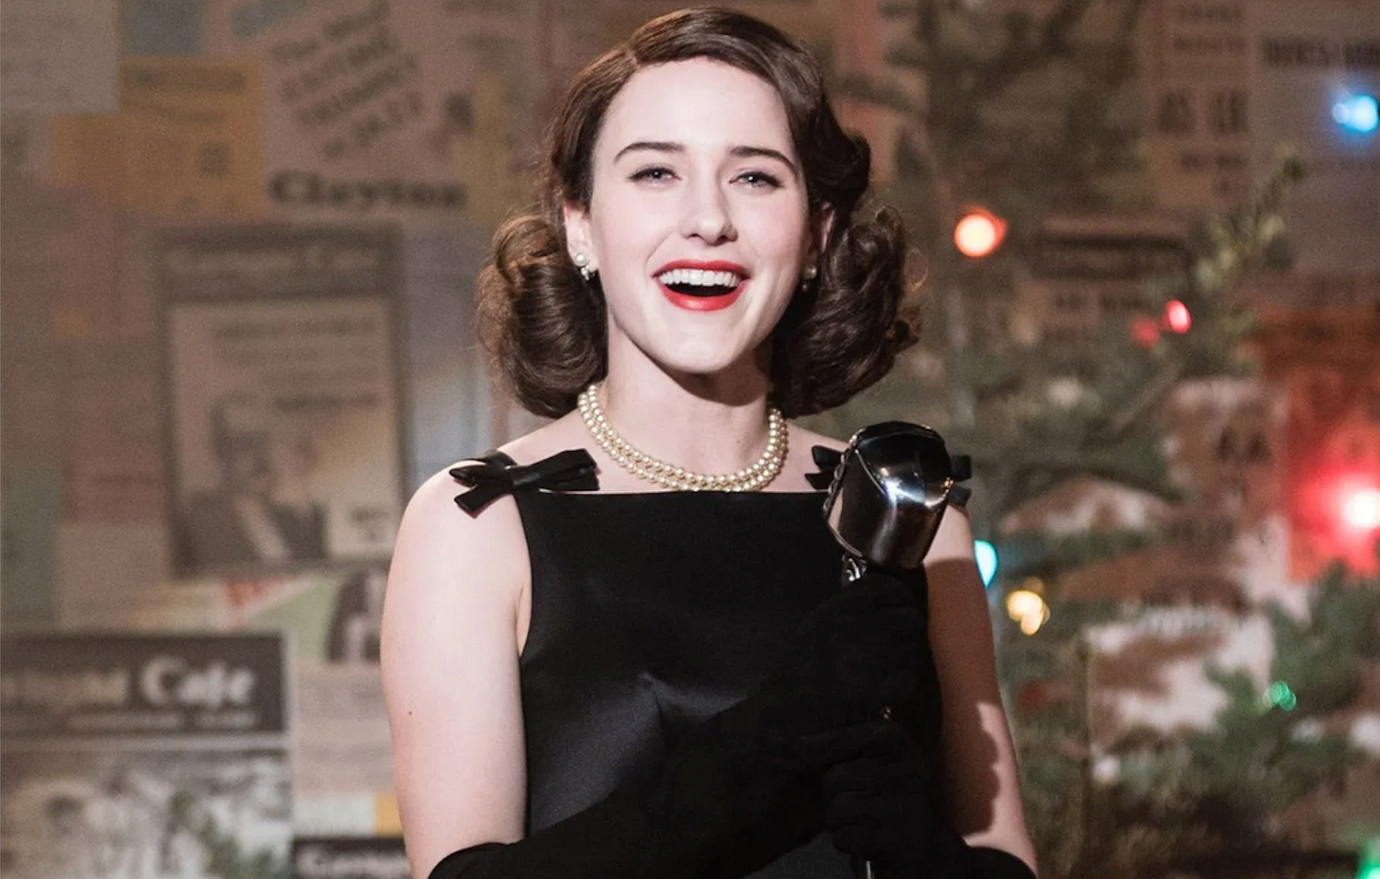 FIND THAT PATTERN: THE MARVELOUS MRS MAISEL